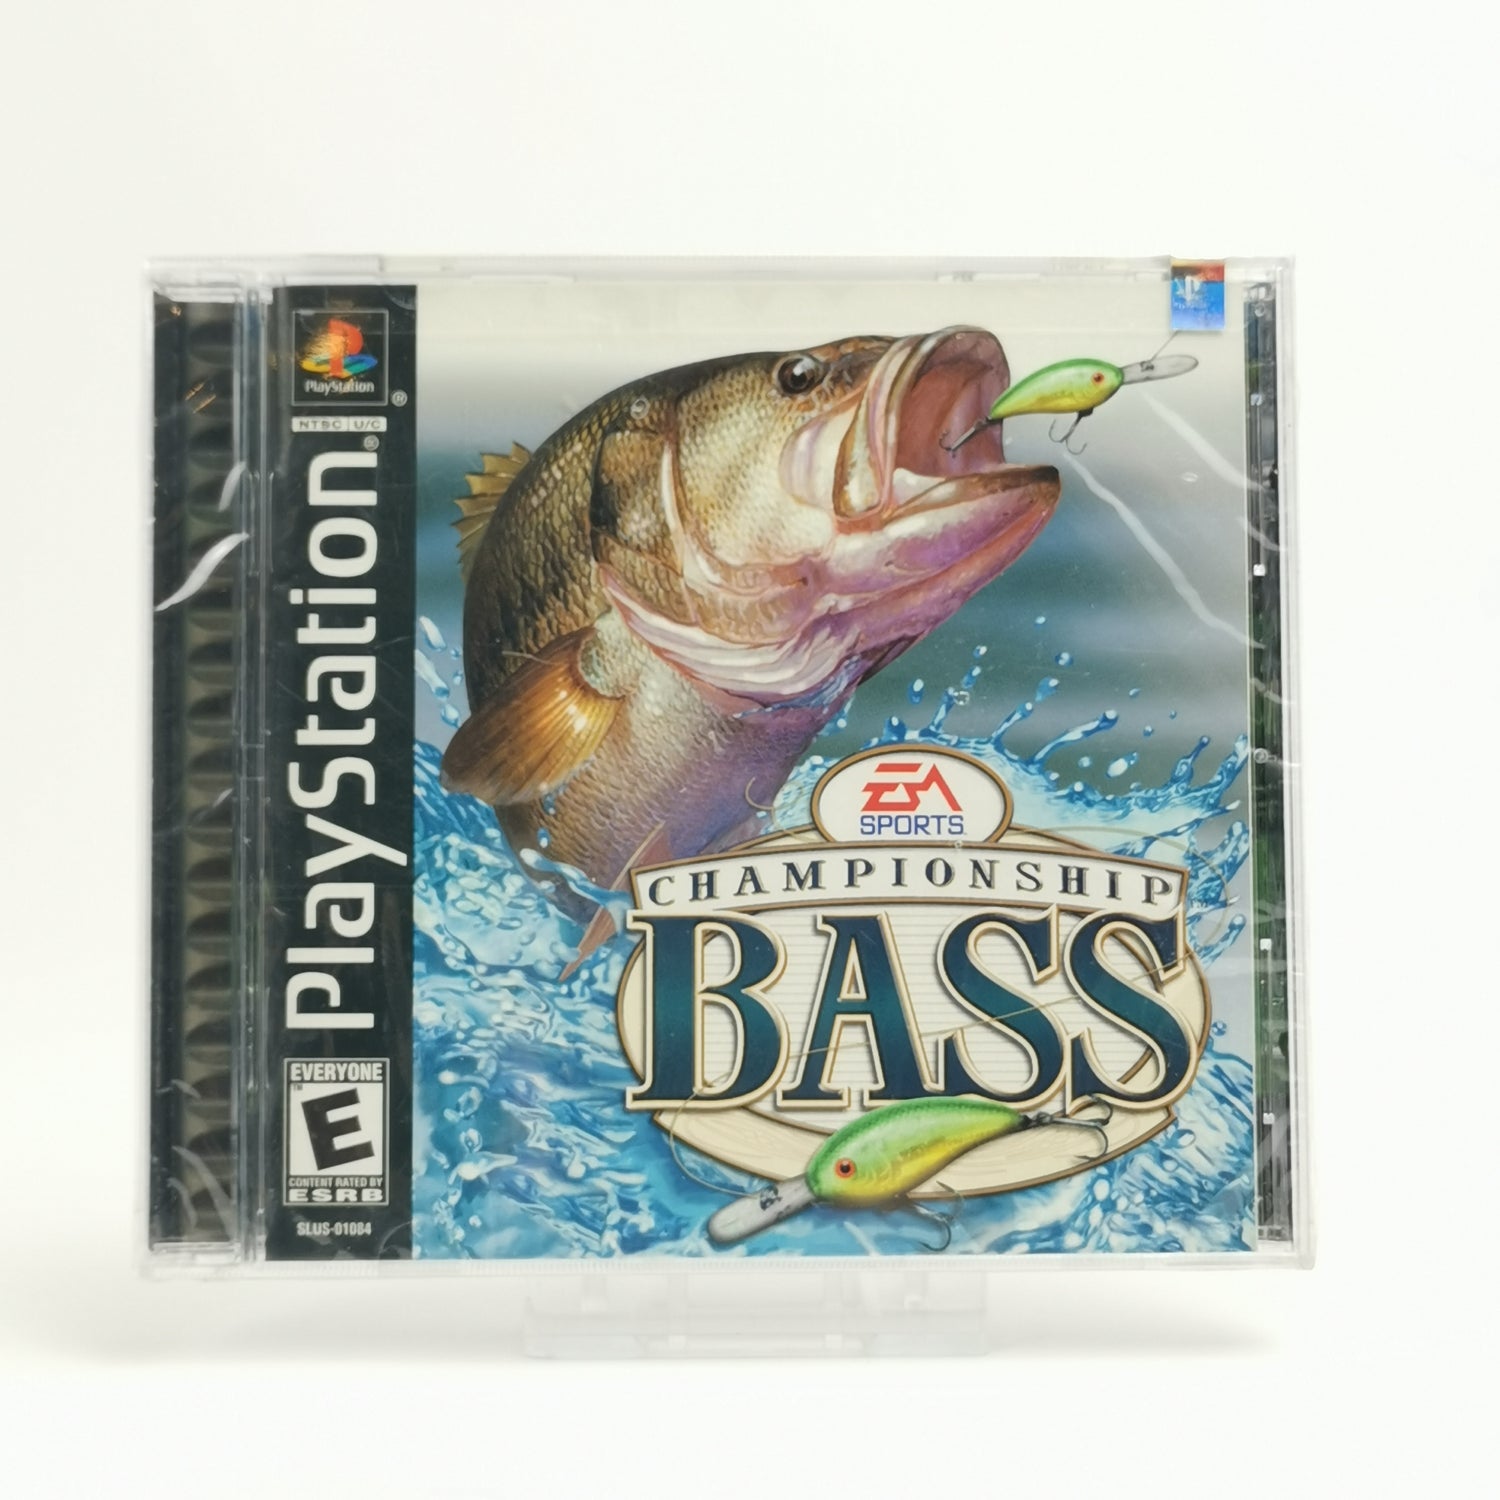 Sony Playstation 1 Game : Championship Bass Fishing | PS1 USA - NEW SEALED